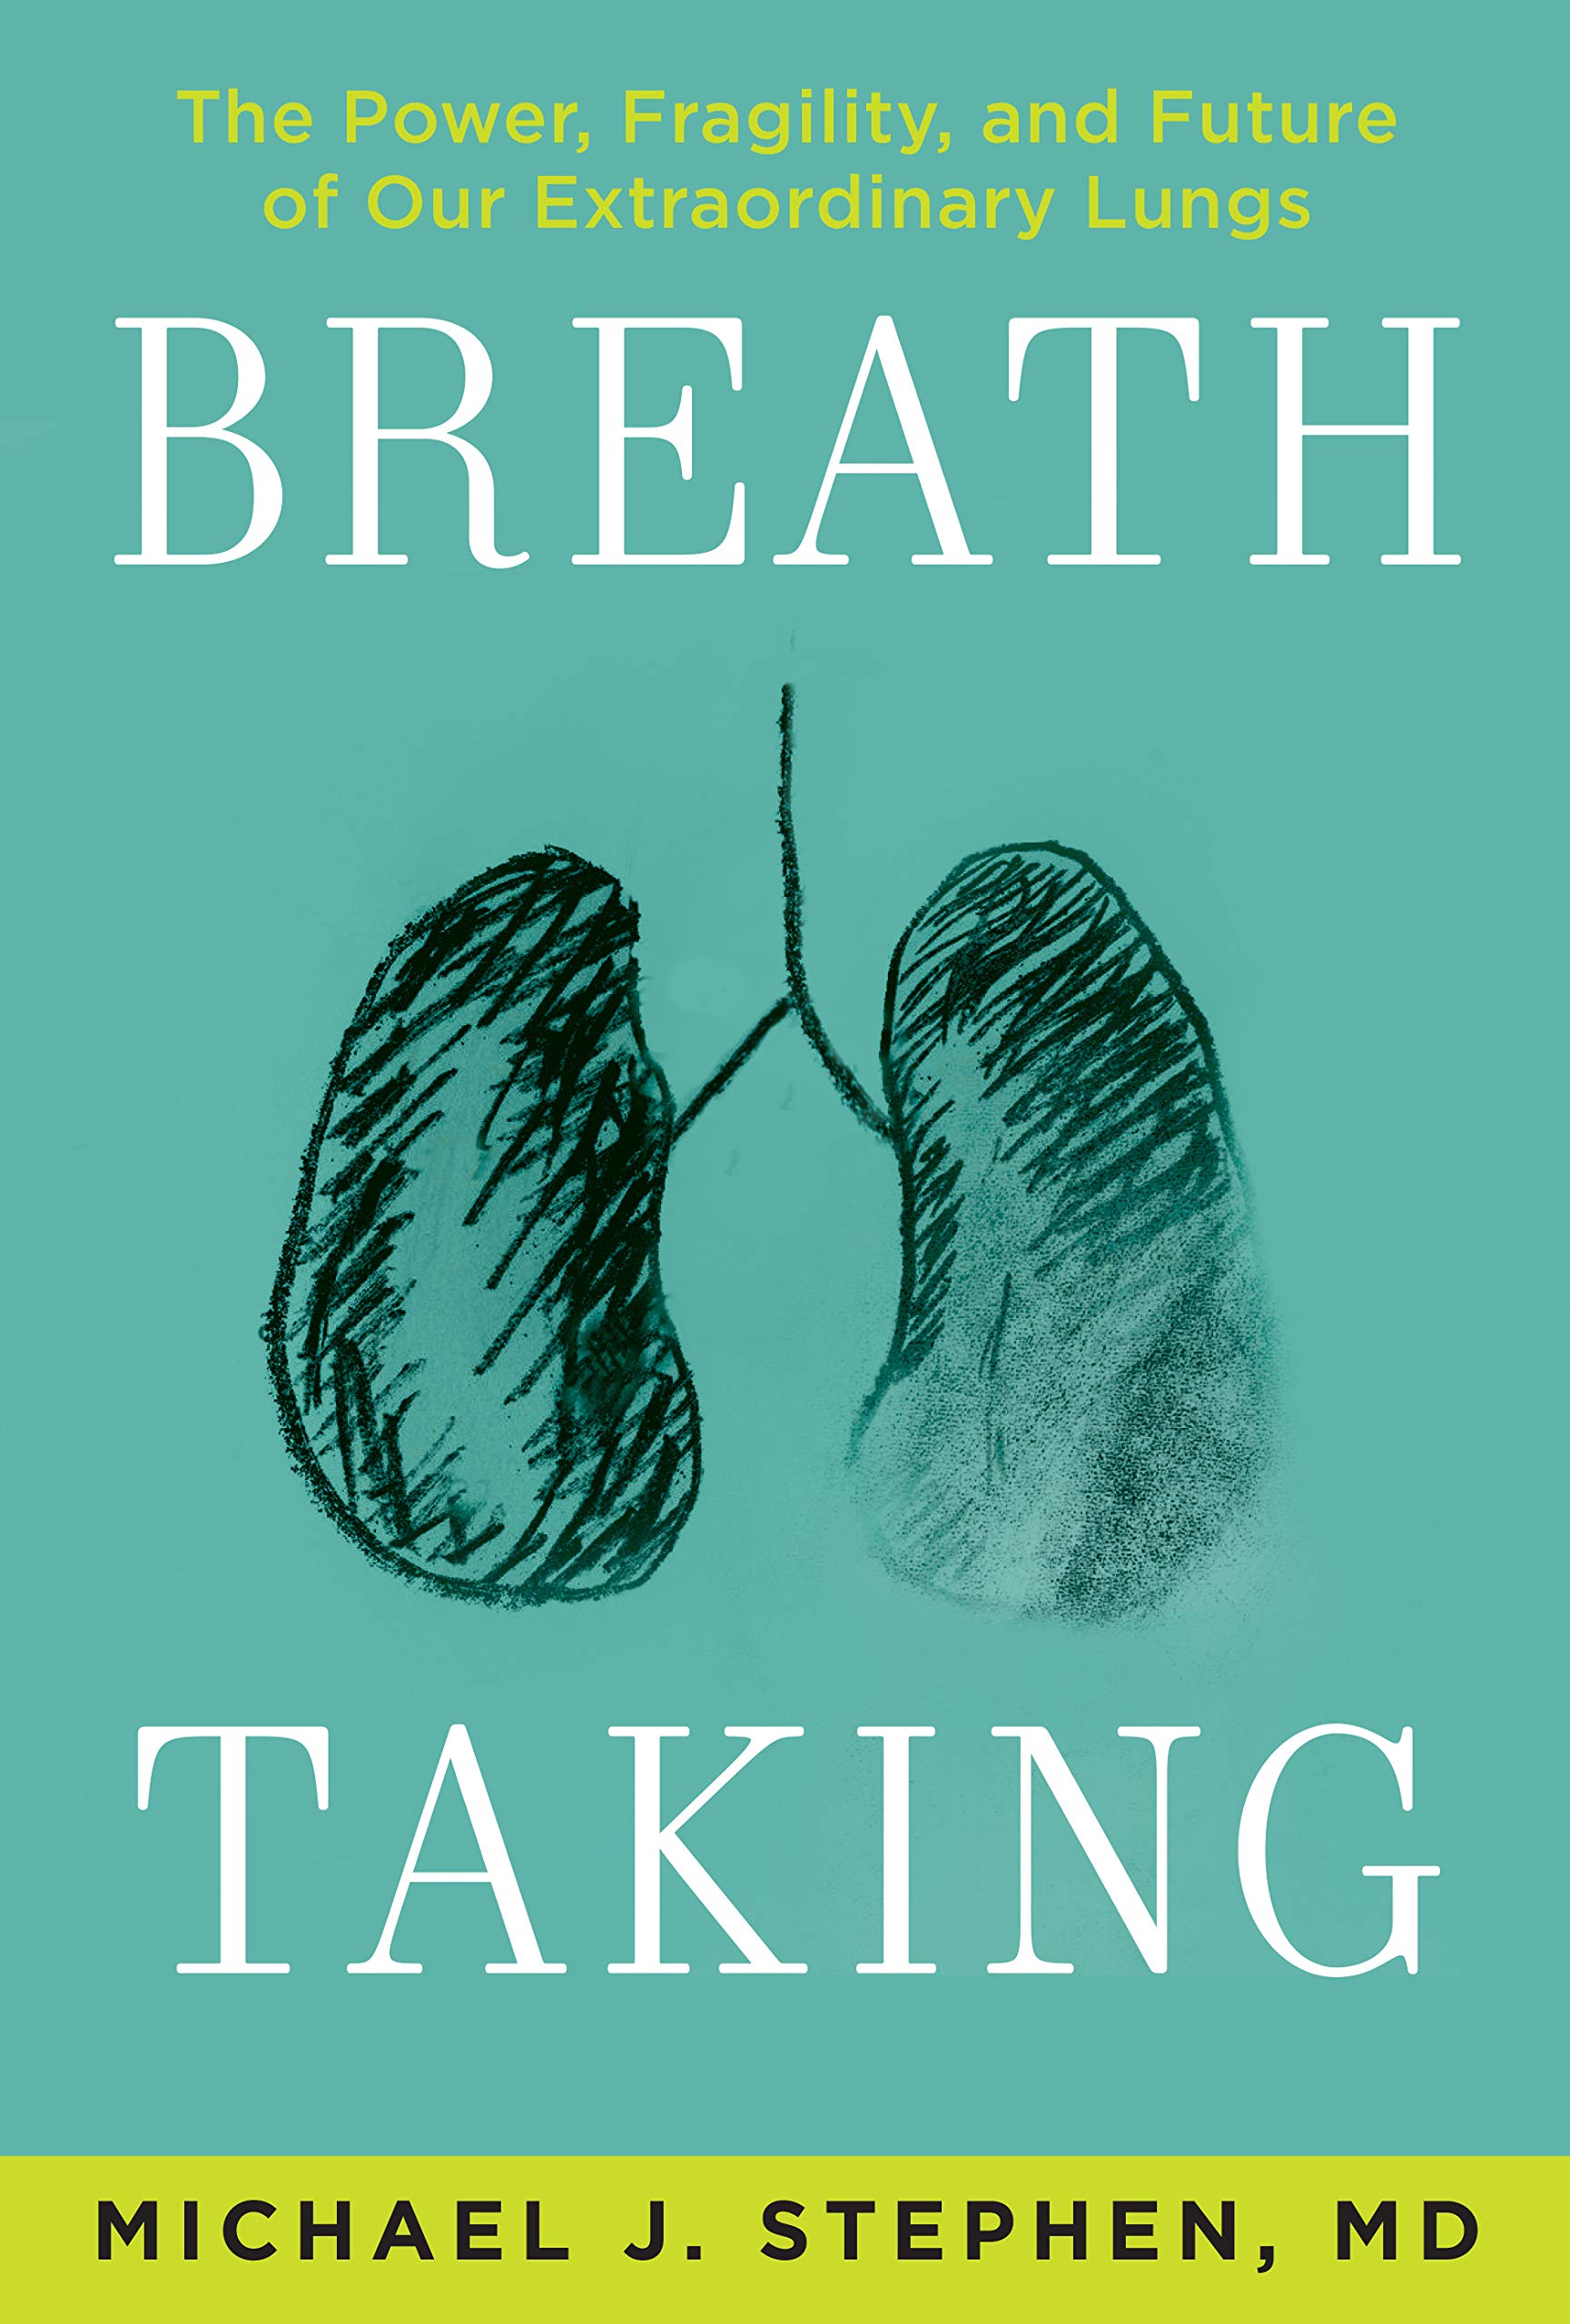 Image for "Breath Taking"